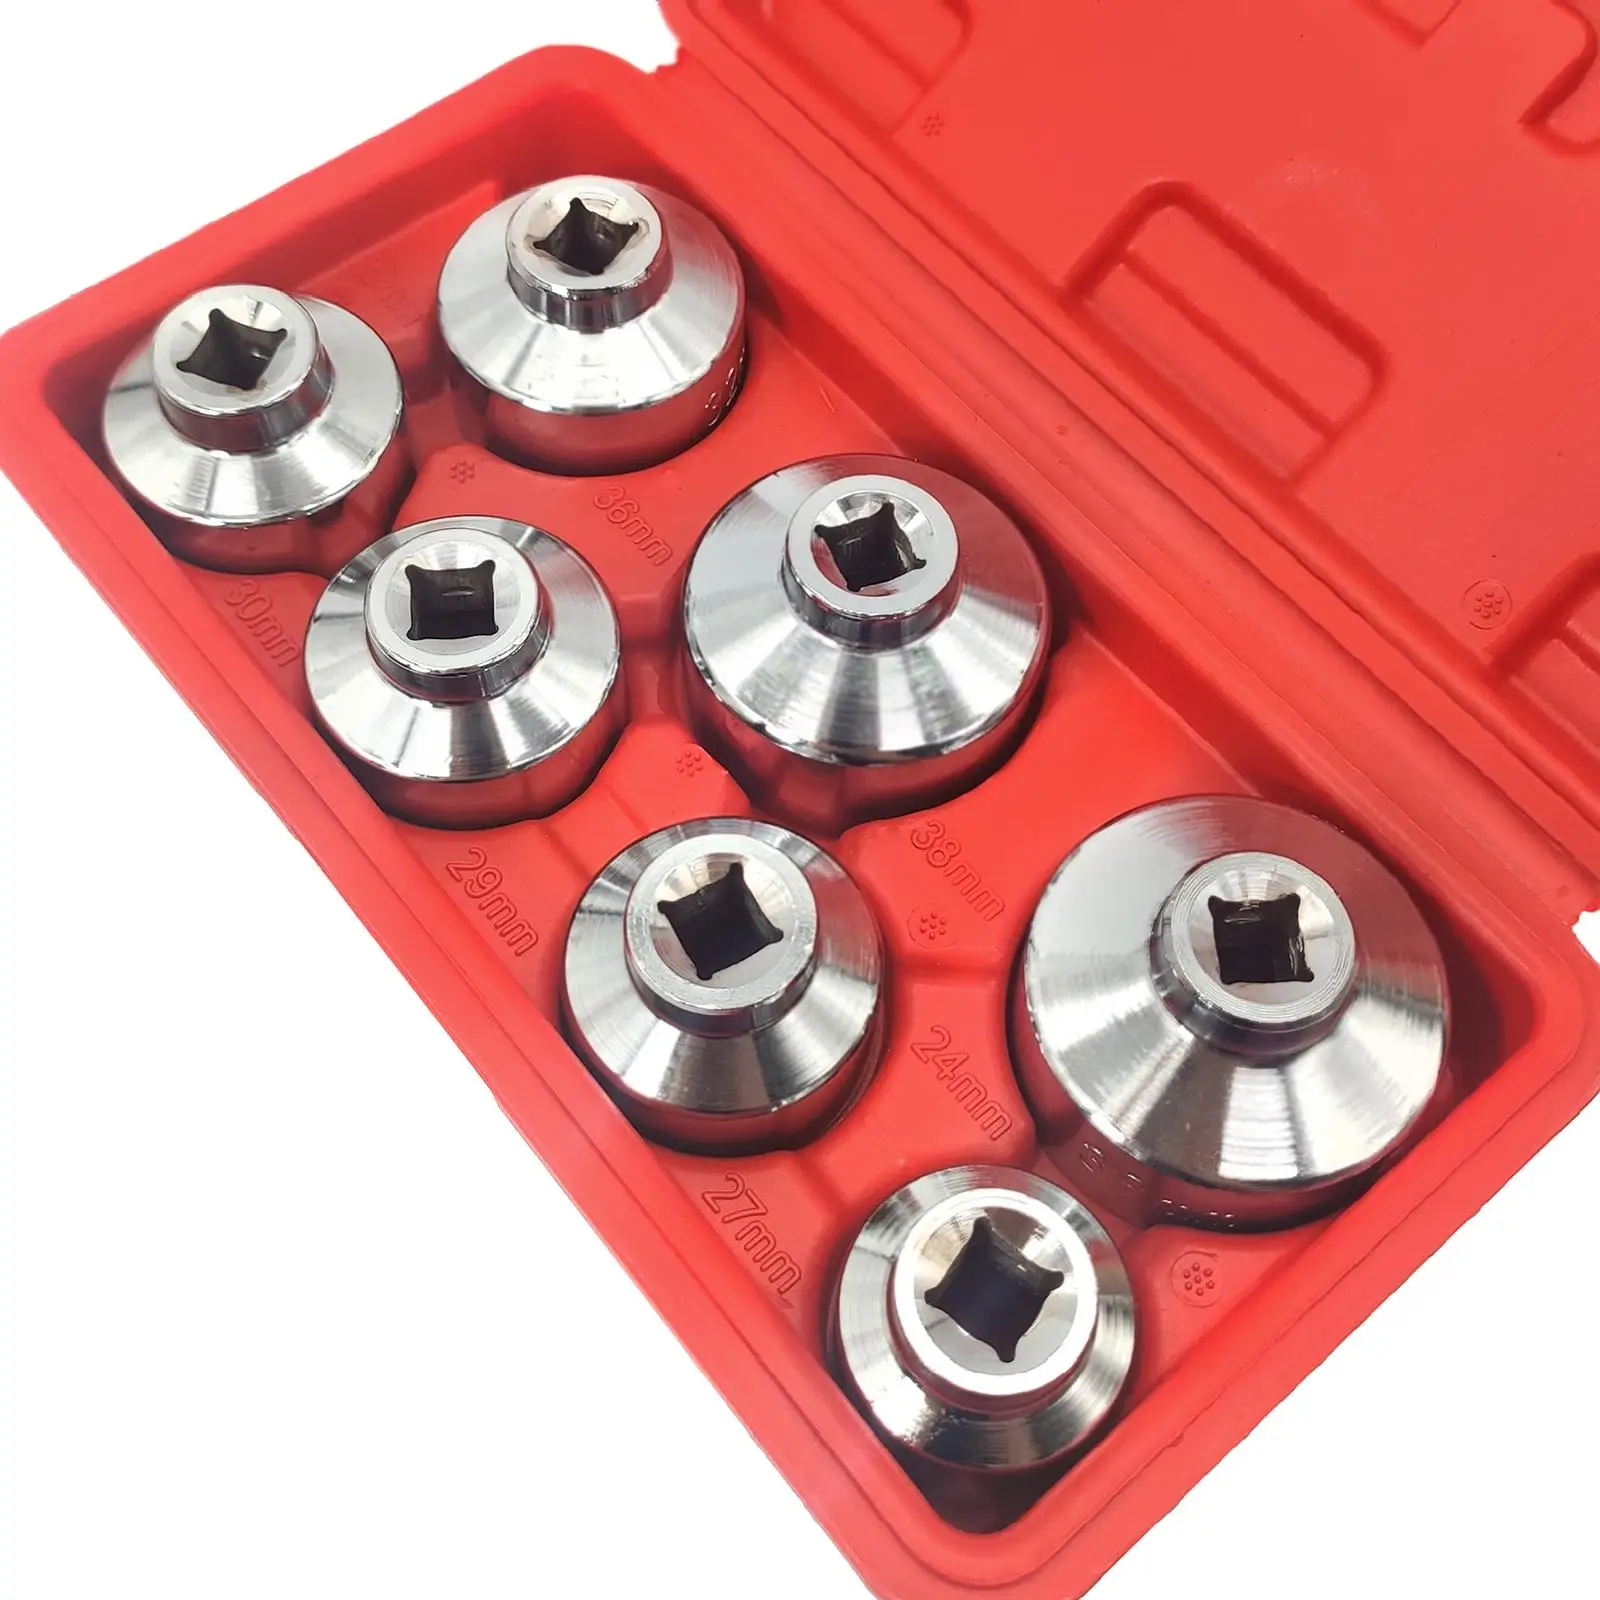 

Paper Housing Oil Wrench 7-Piece Socket Set Tool 24mm,27mm,29mm,30mm,32mm,36mm,38mm